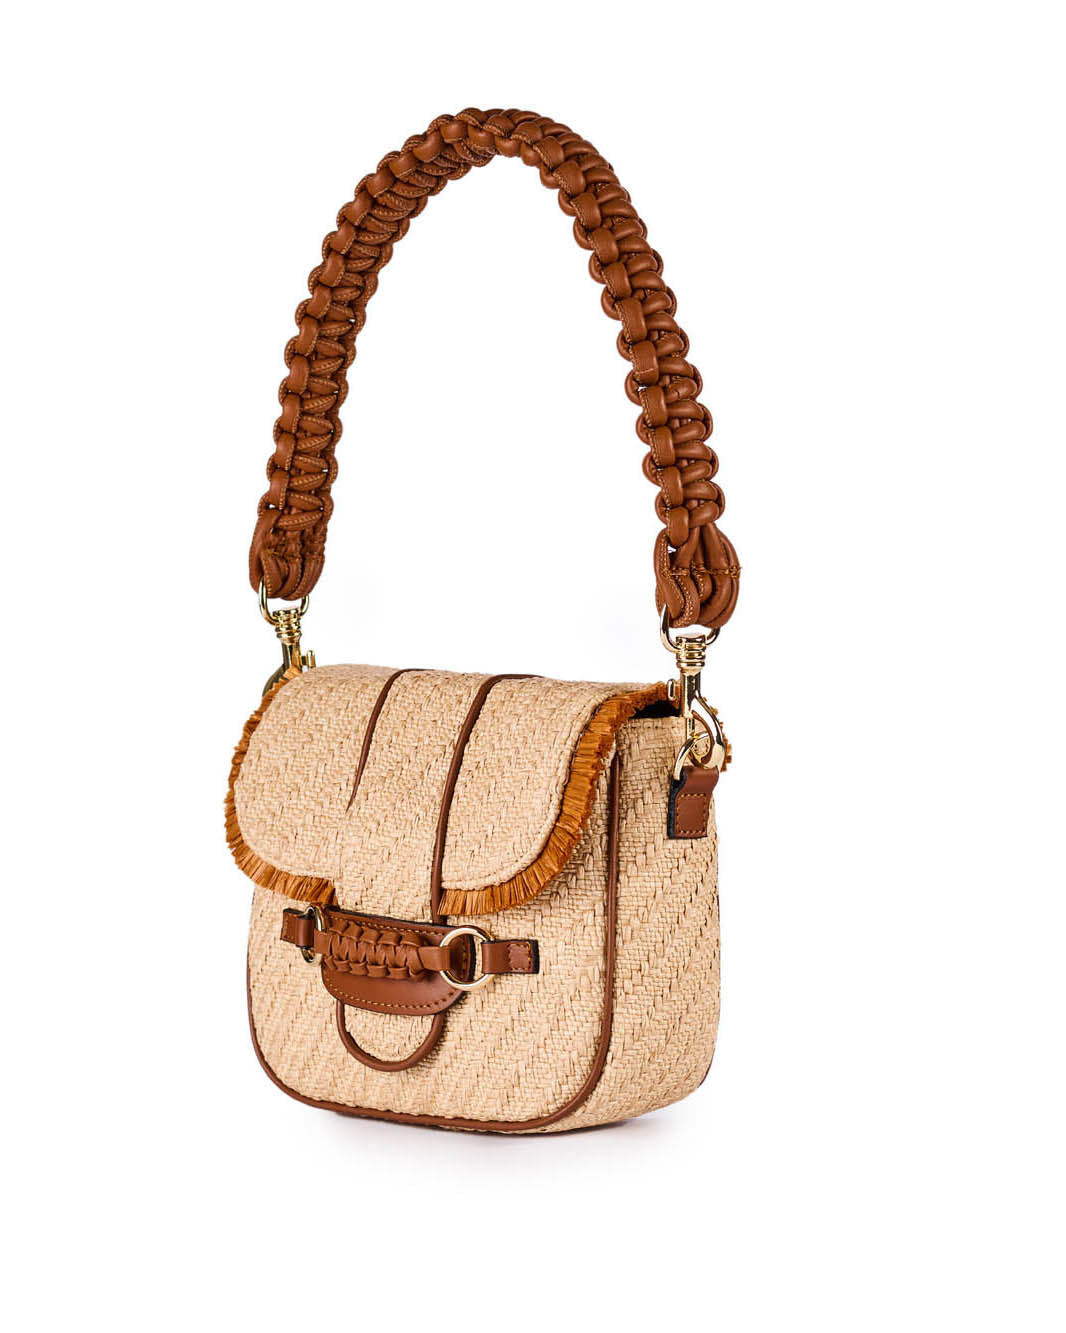 Stylish tan woven handbag with braided leather handle and gold accents